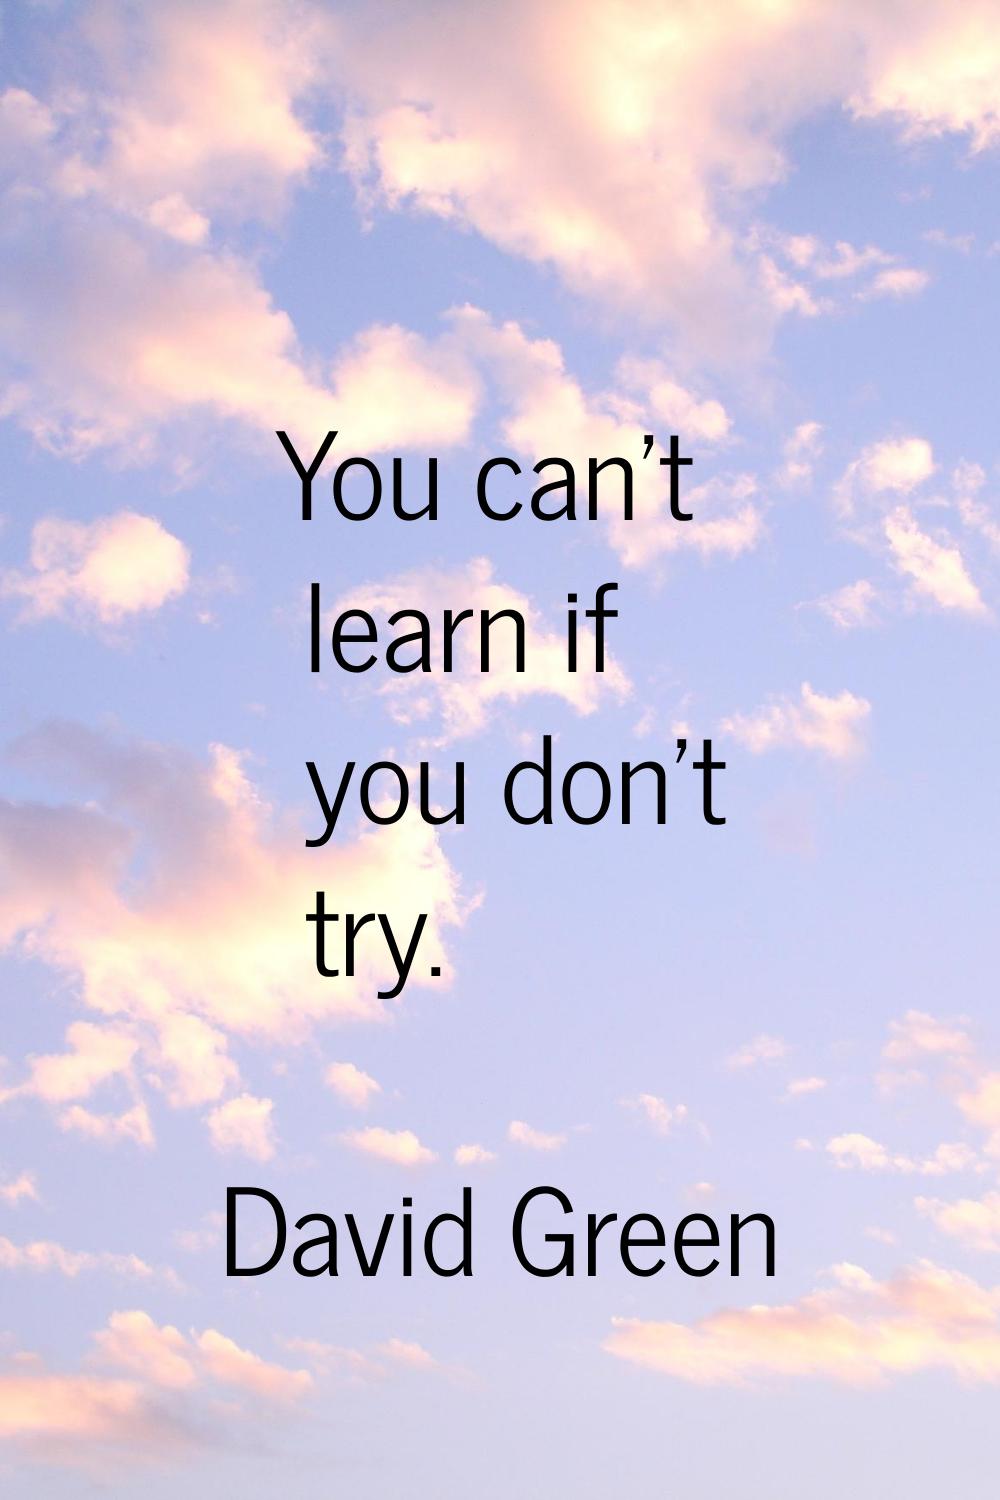 You can't learn if you don't try.